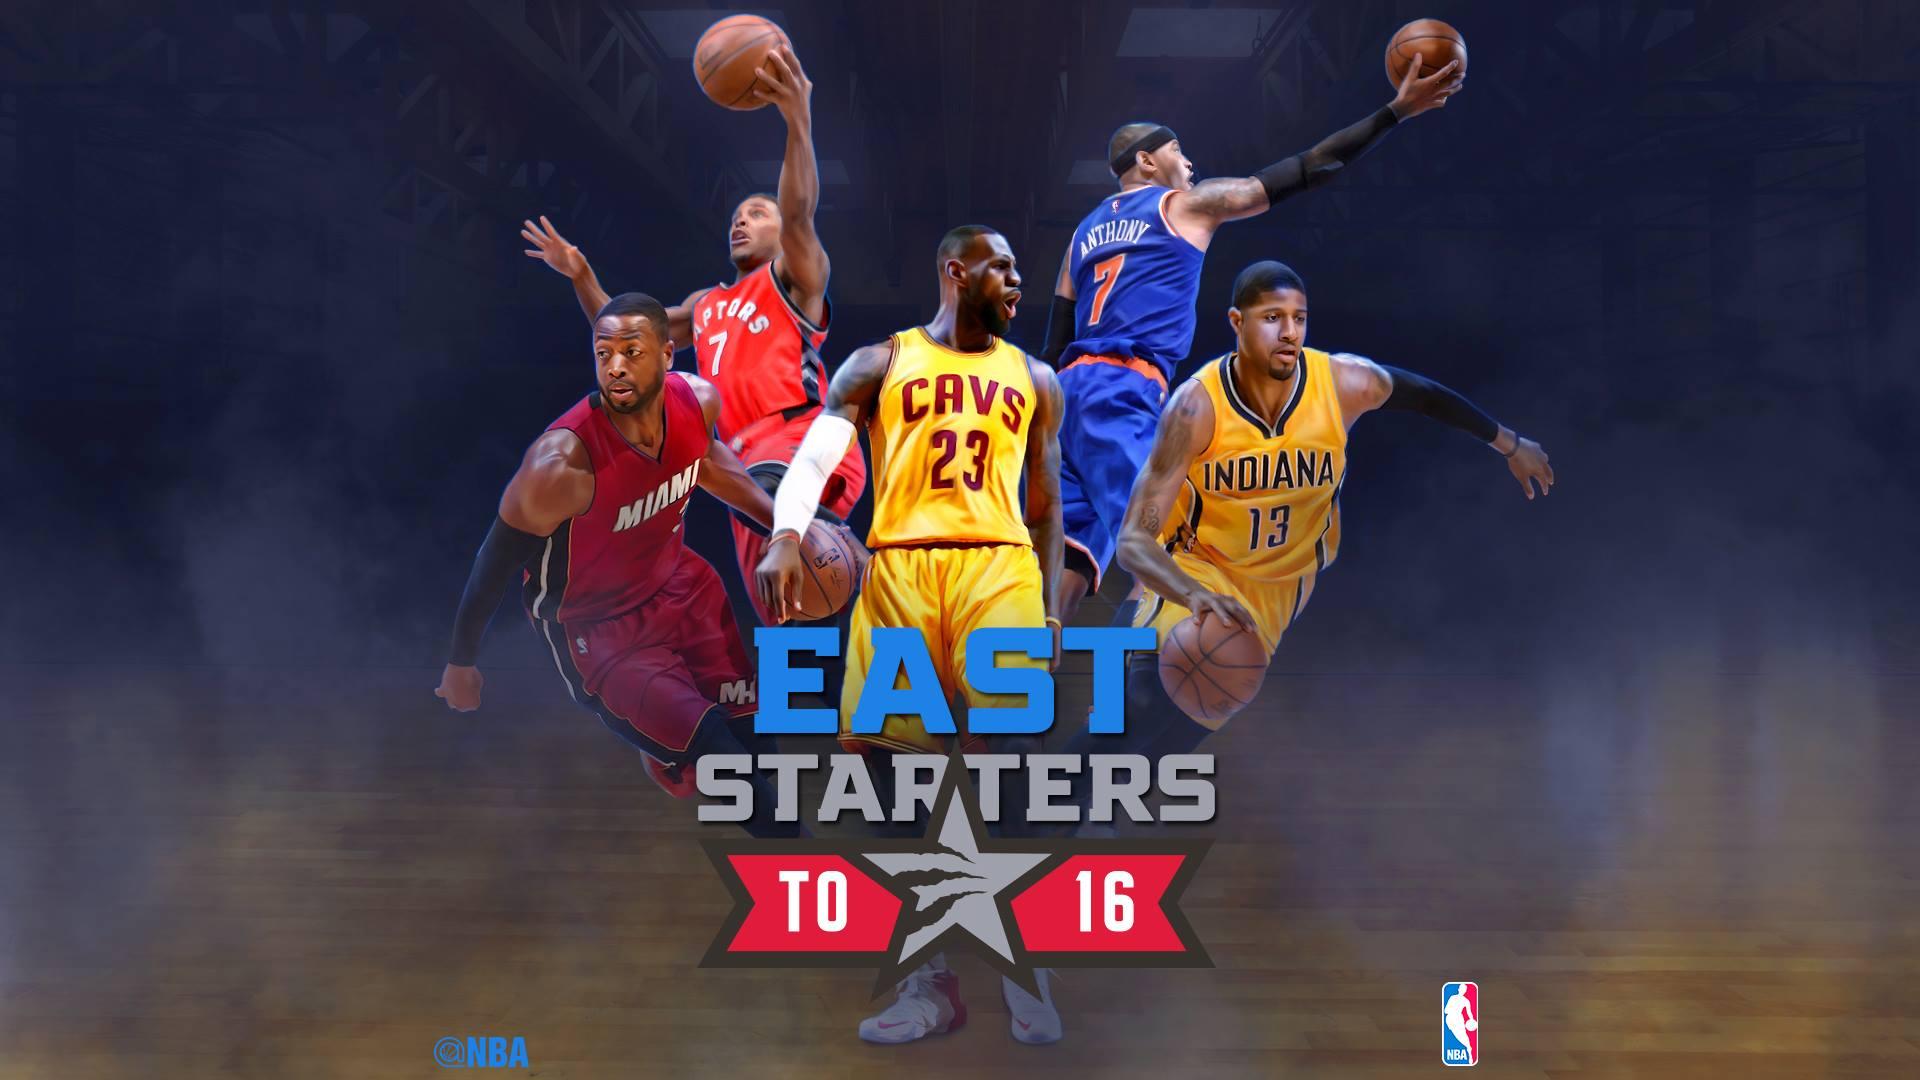 Free download nba all star game wallpaper Gallery [1920x1080]